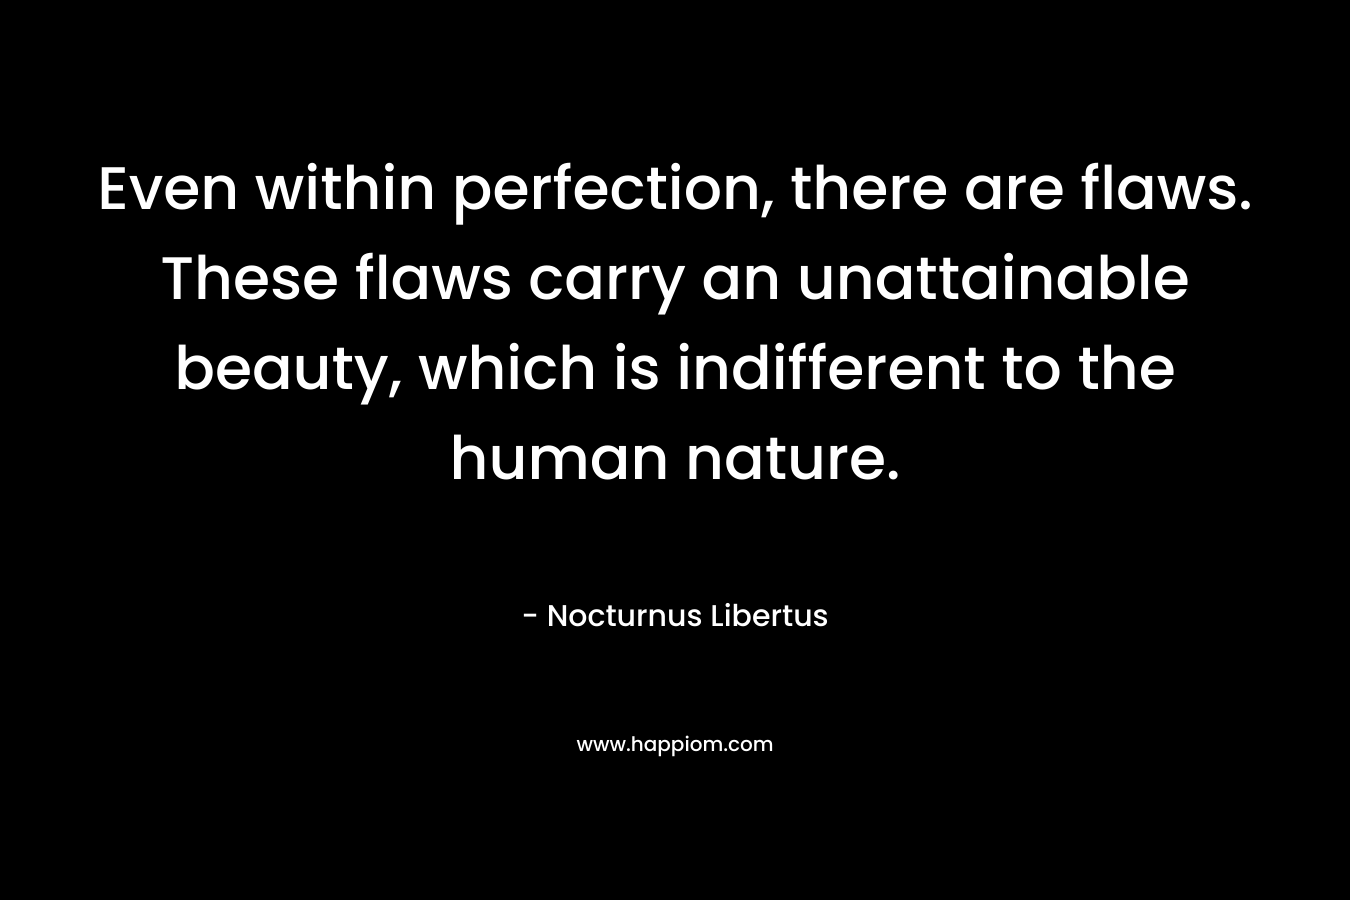 Even within perfection, there are flaws. These flaws carry an unattainable beauty, which is indifferent to the human nature. – Nocturnus Libertus